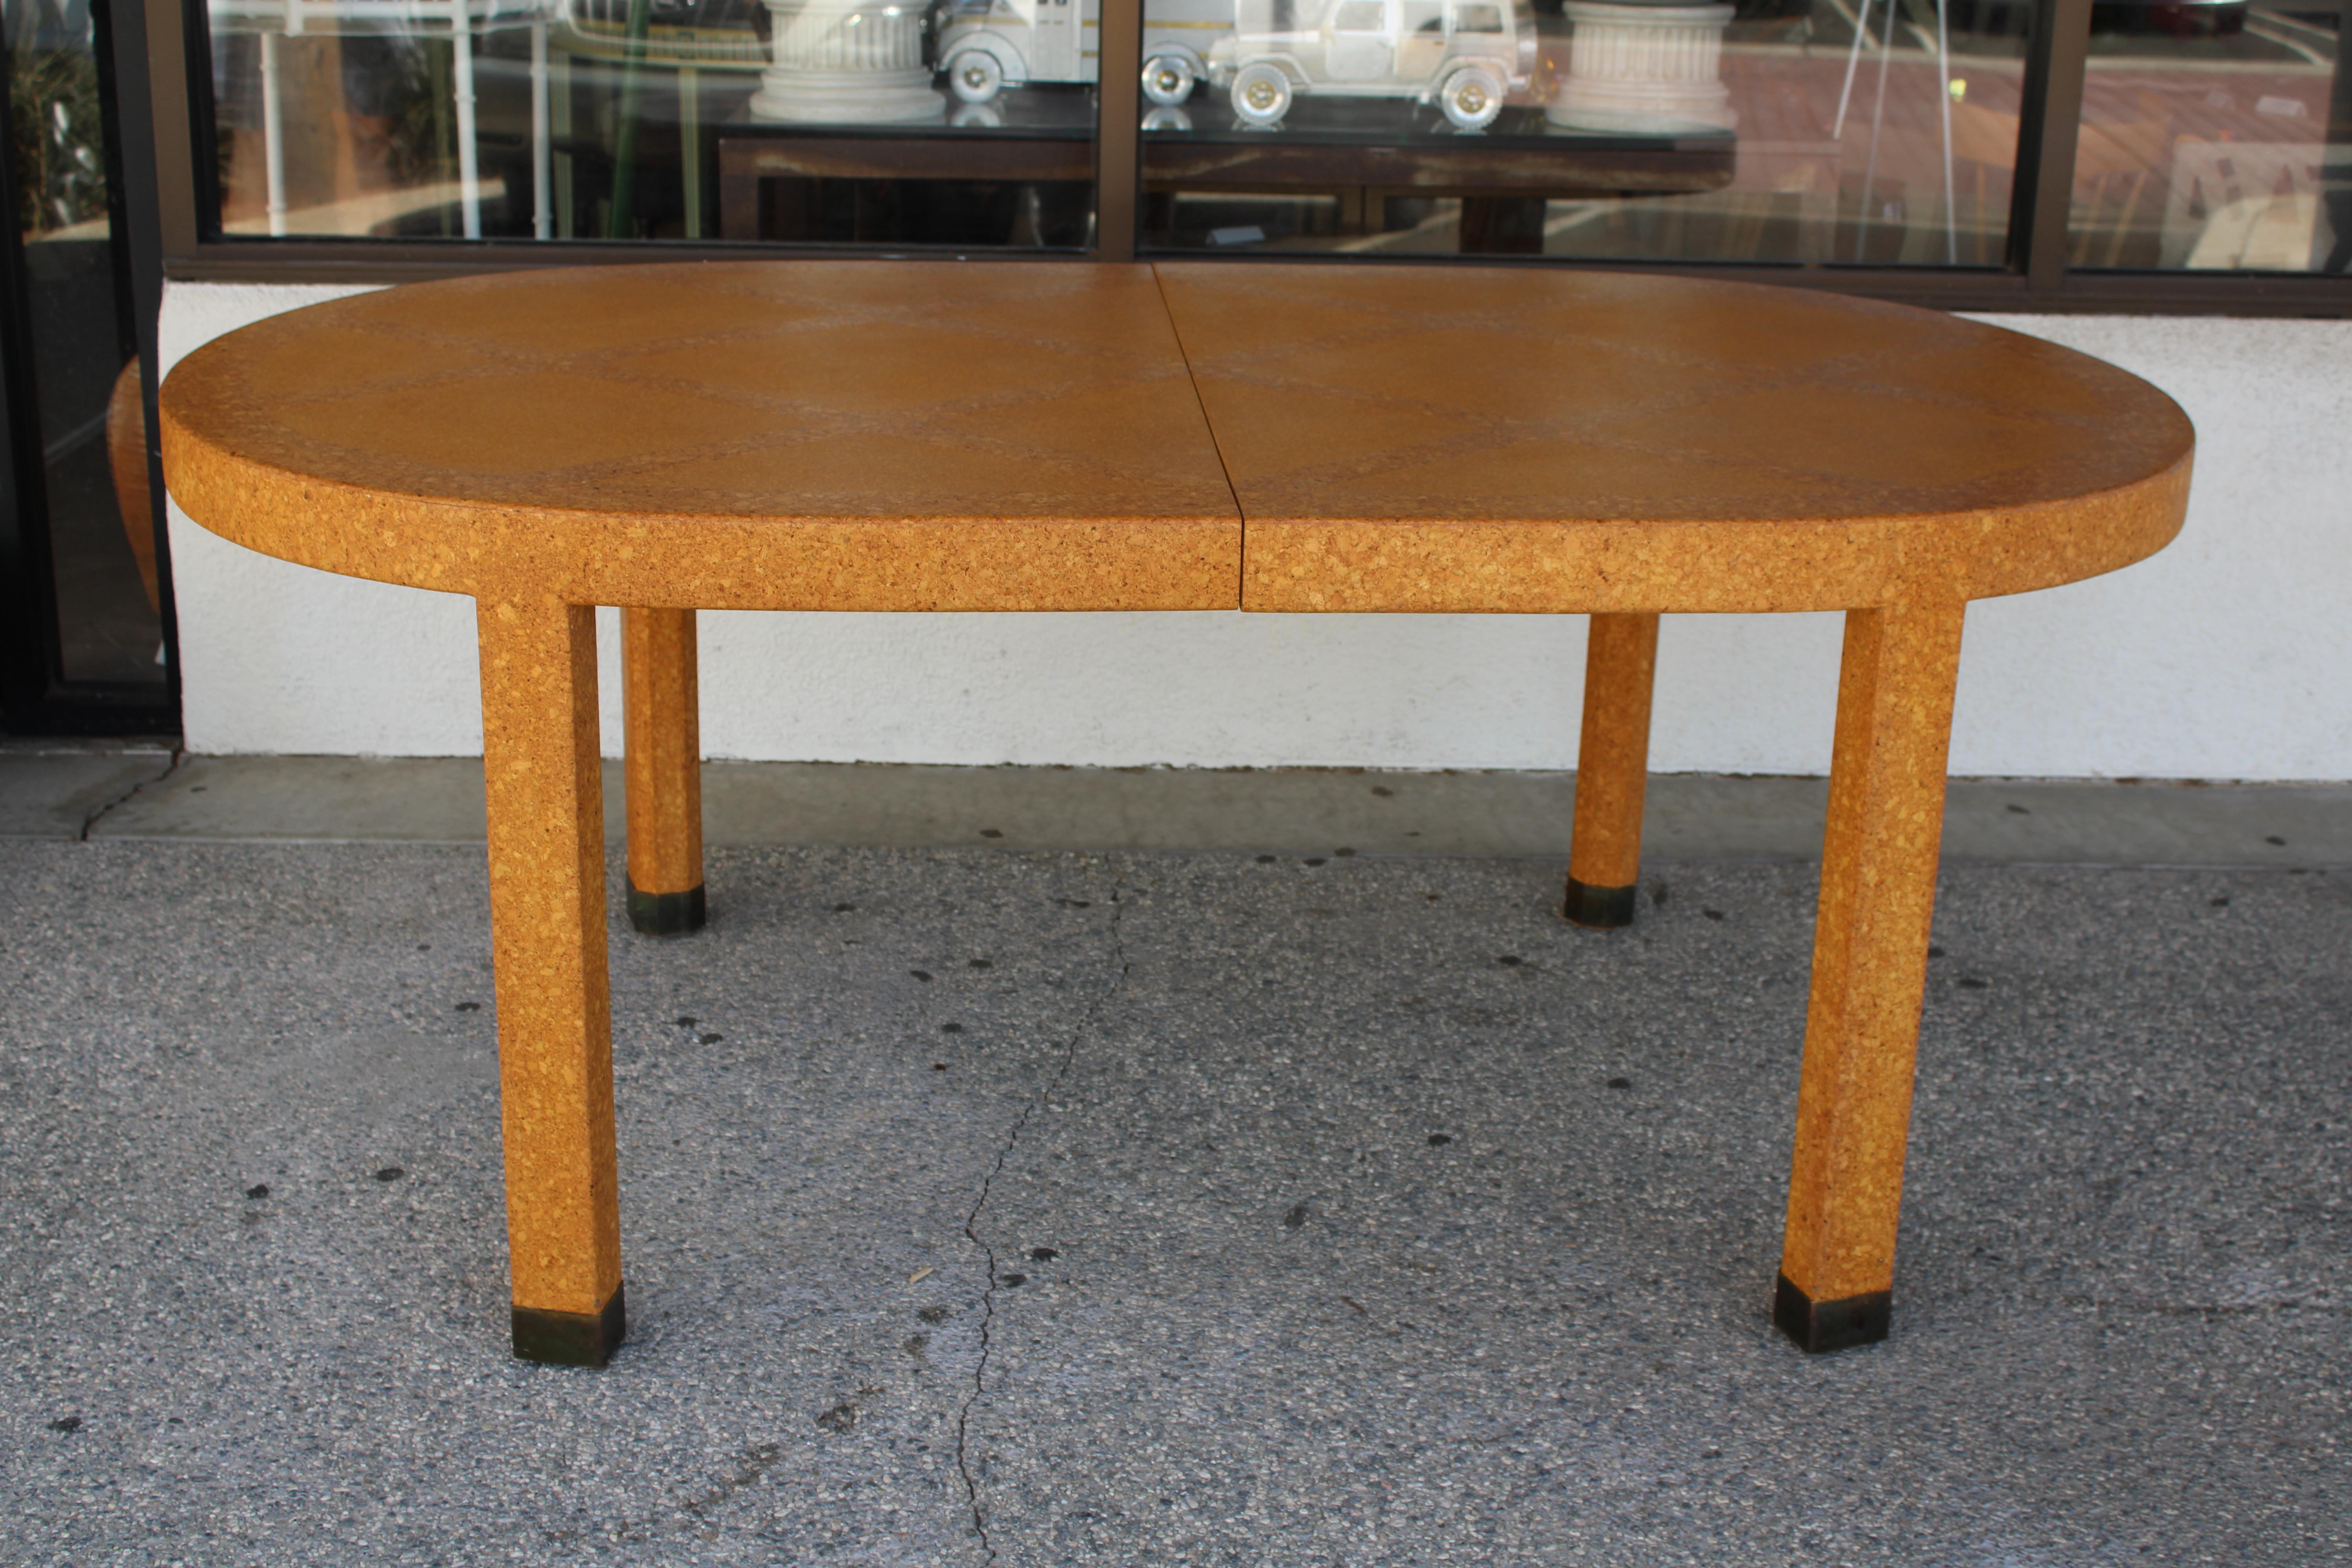 Expandable cork dining table attributed to Paul Frankl. Table has 2 leaves each measuring 22